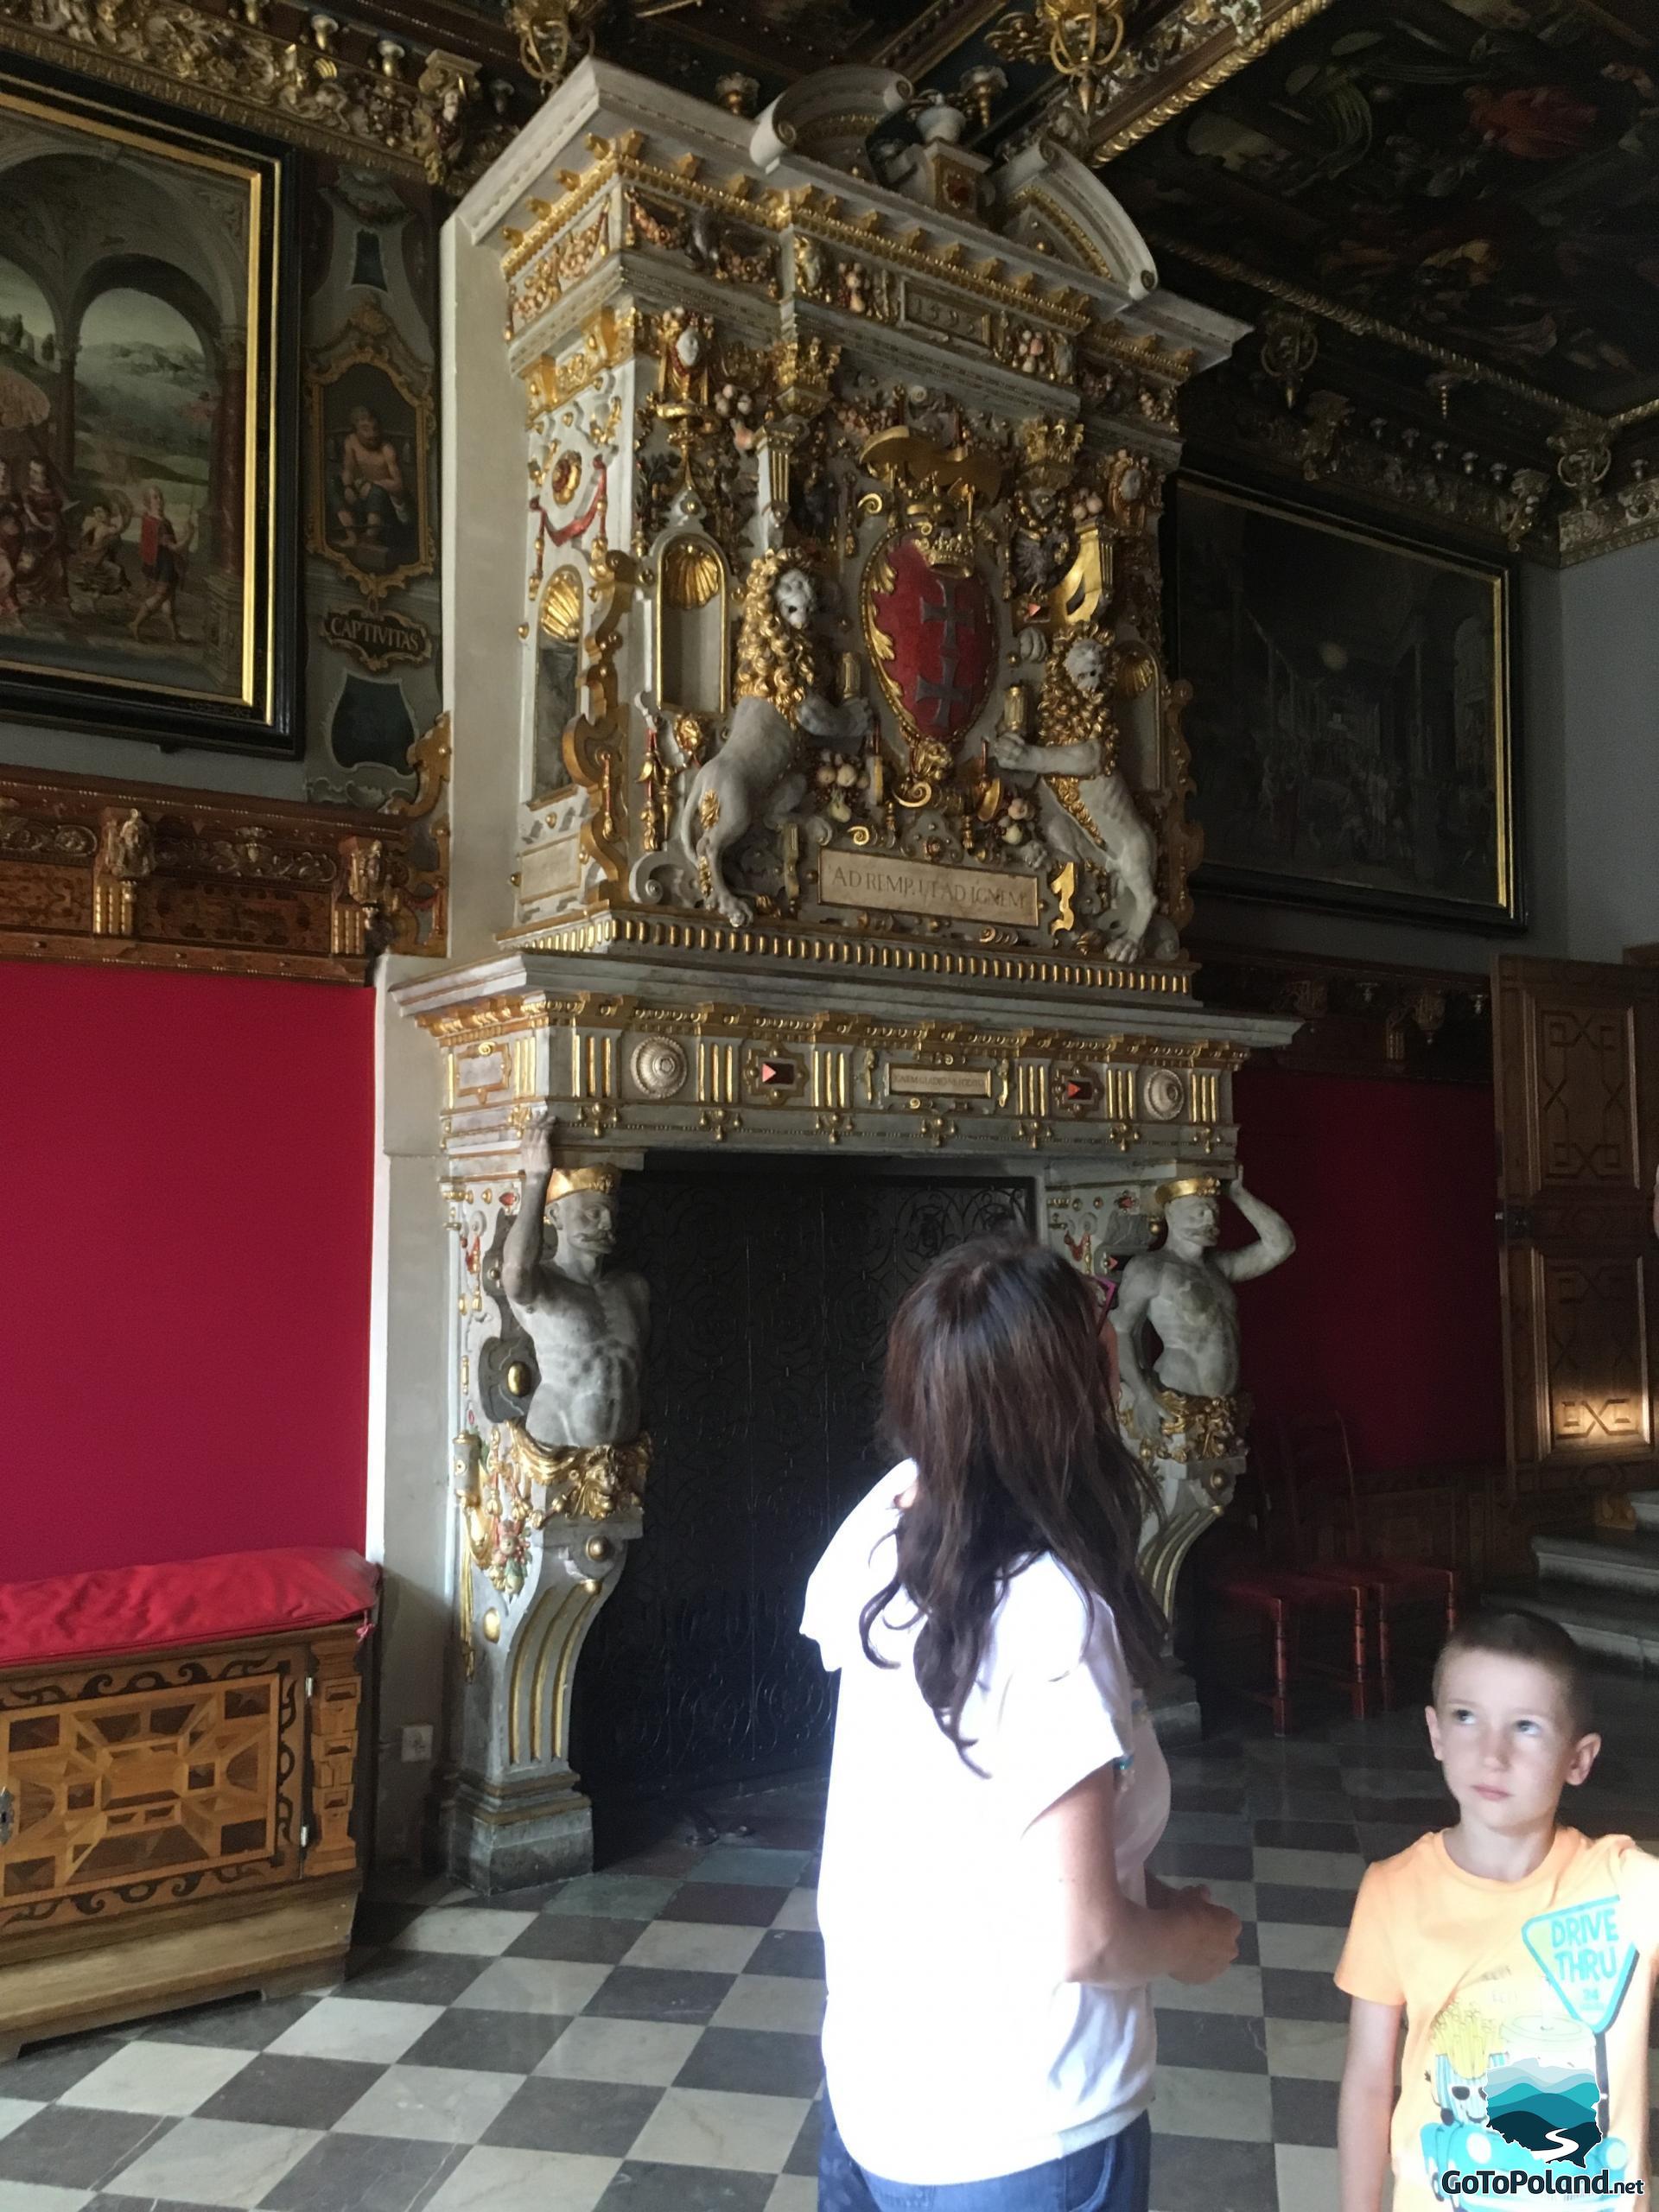 a woman and a boy standing in a decorative room, in from of a historic stove with gold ornaments